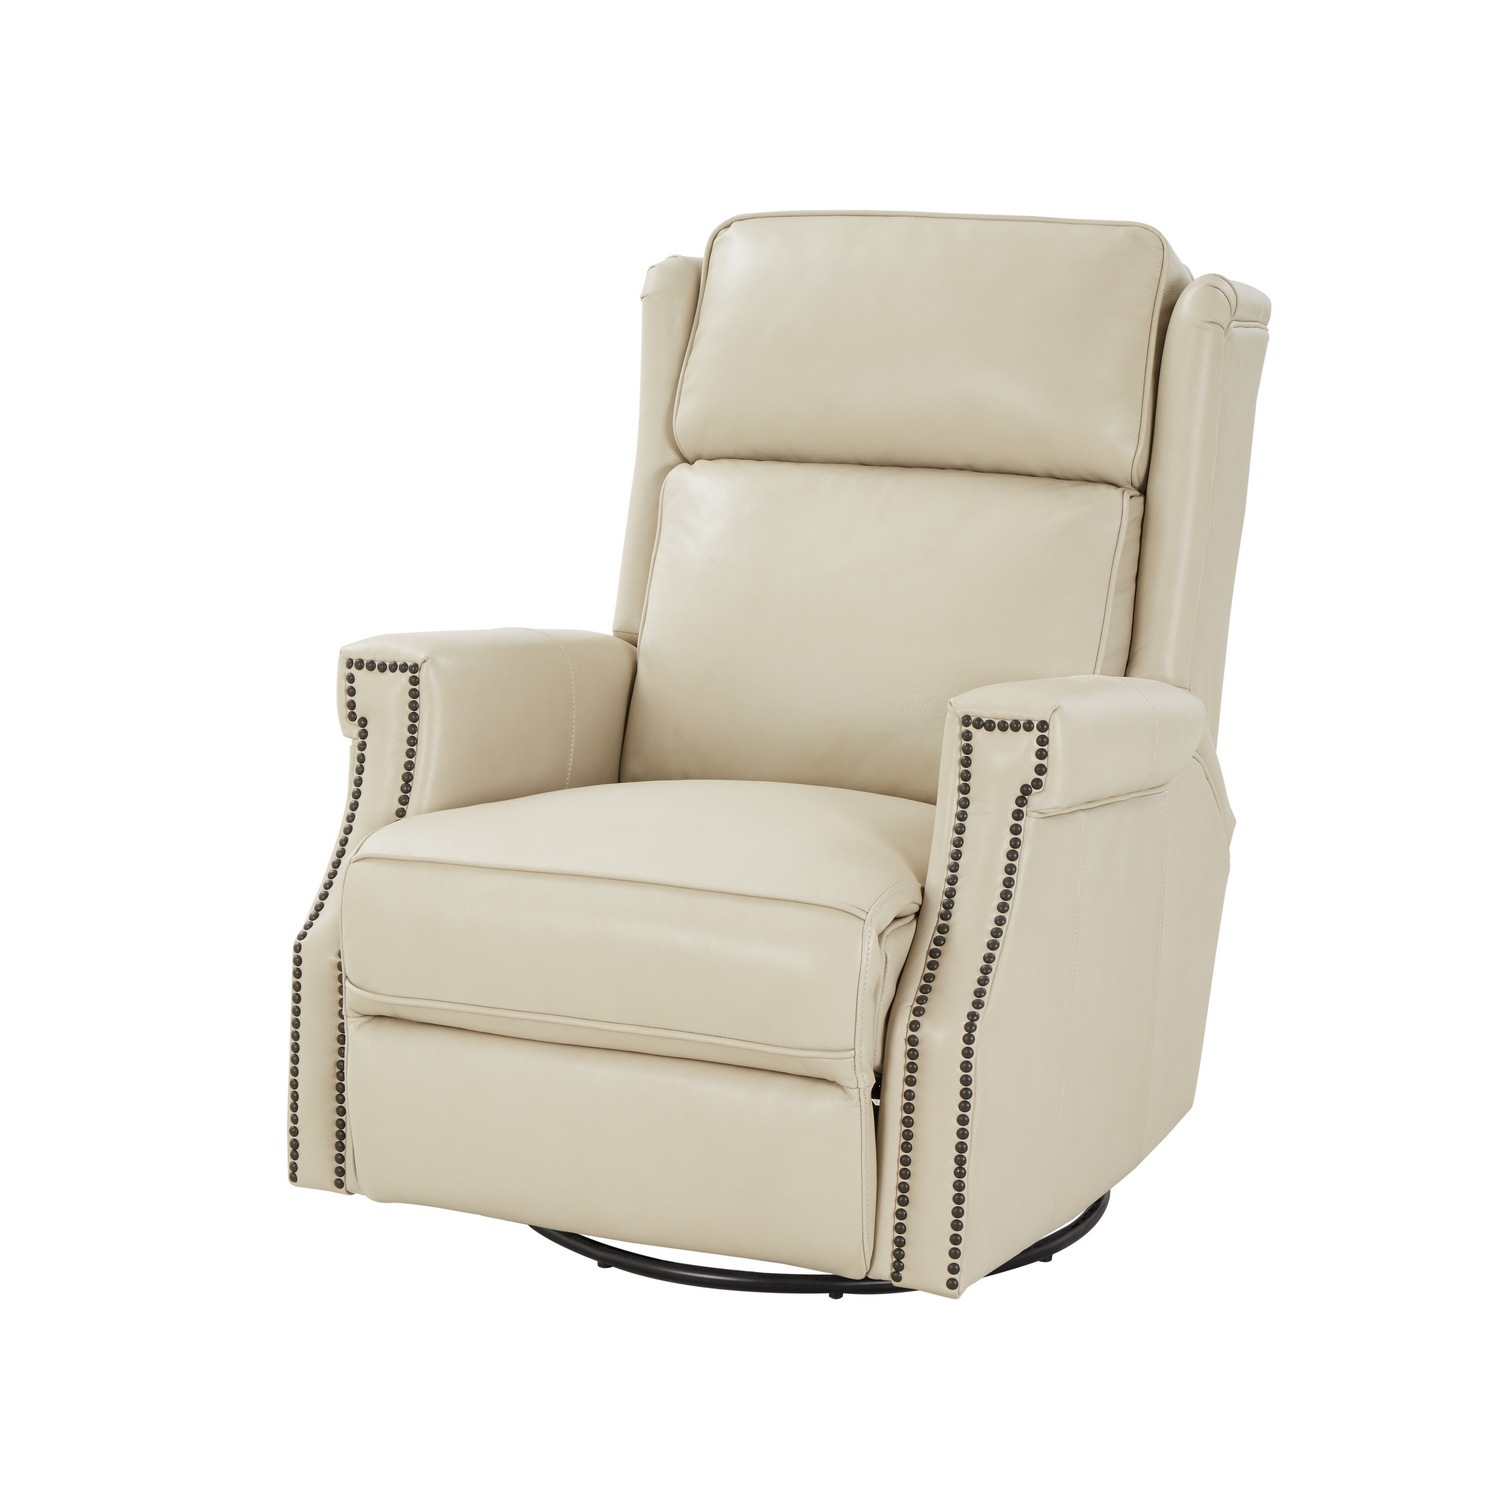 Barcalounger Brookmore Swivel Glider Recliner Chair with Power Recline and Power Head Rest - Barone Parchment/All Leather